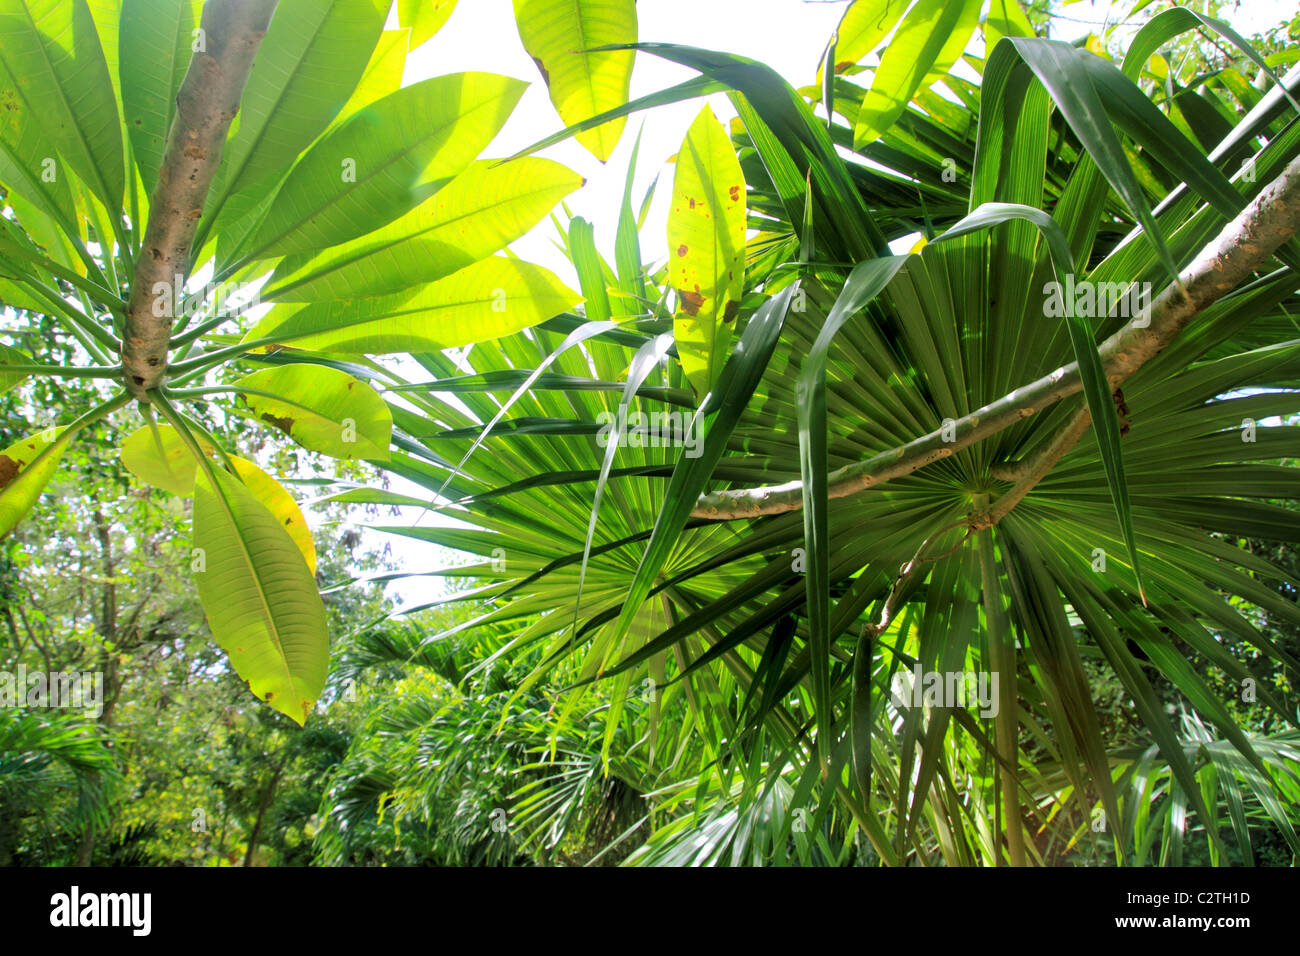 Mexican Ecology High Resolution Stock Photography and Images - Alamy